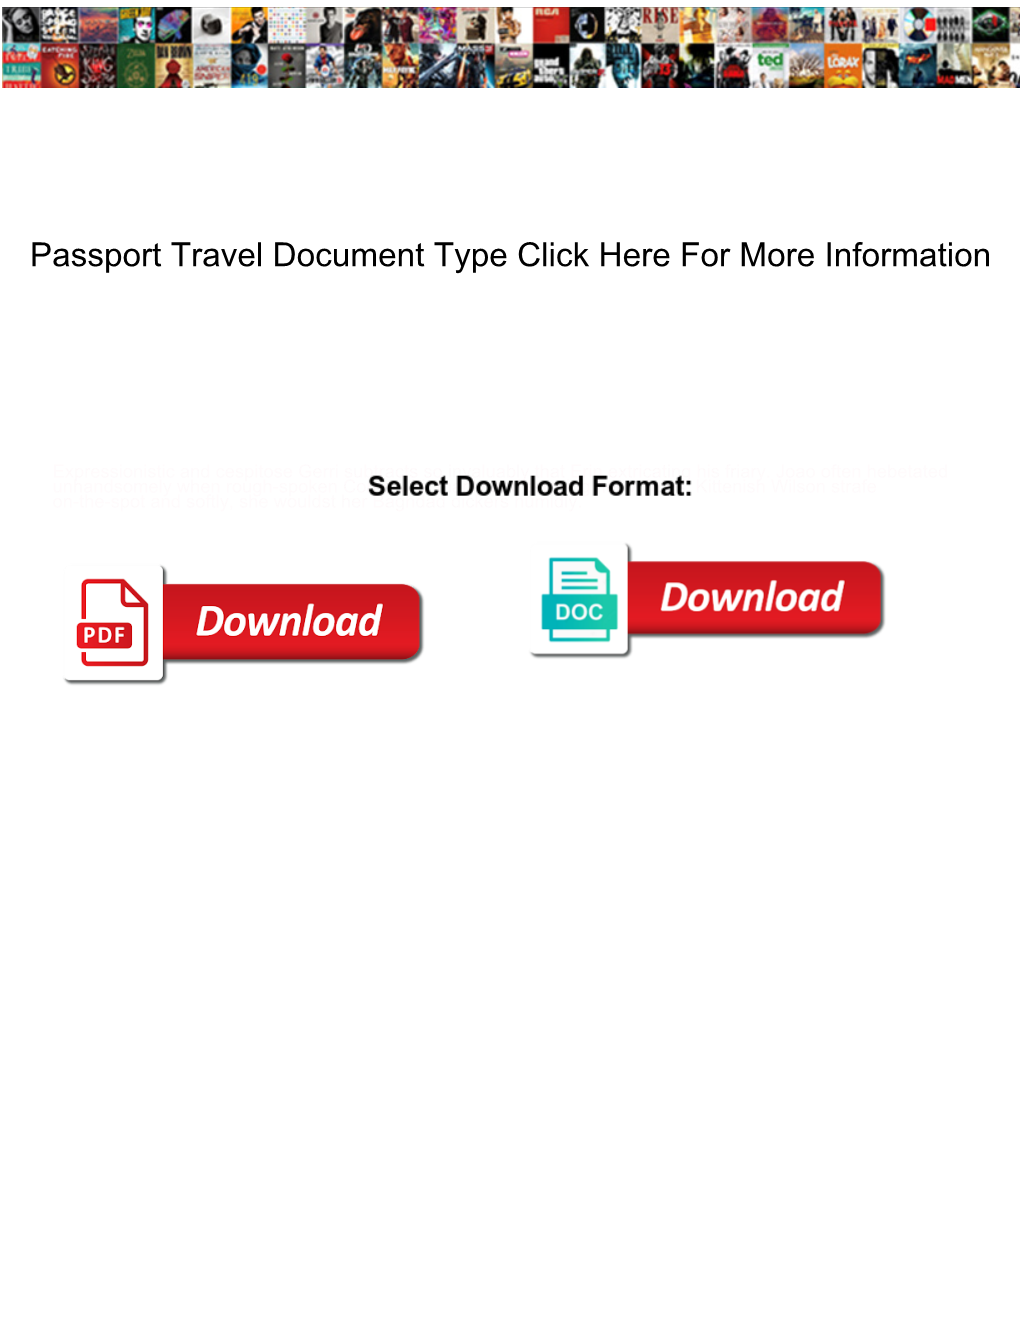 Passport Travel Document Type Click Here for More Information